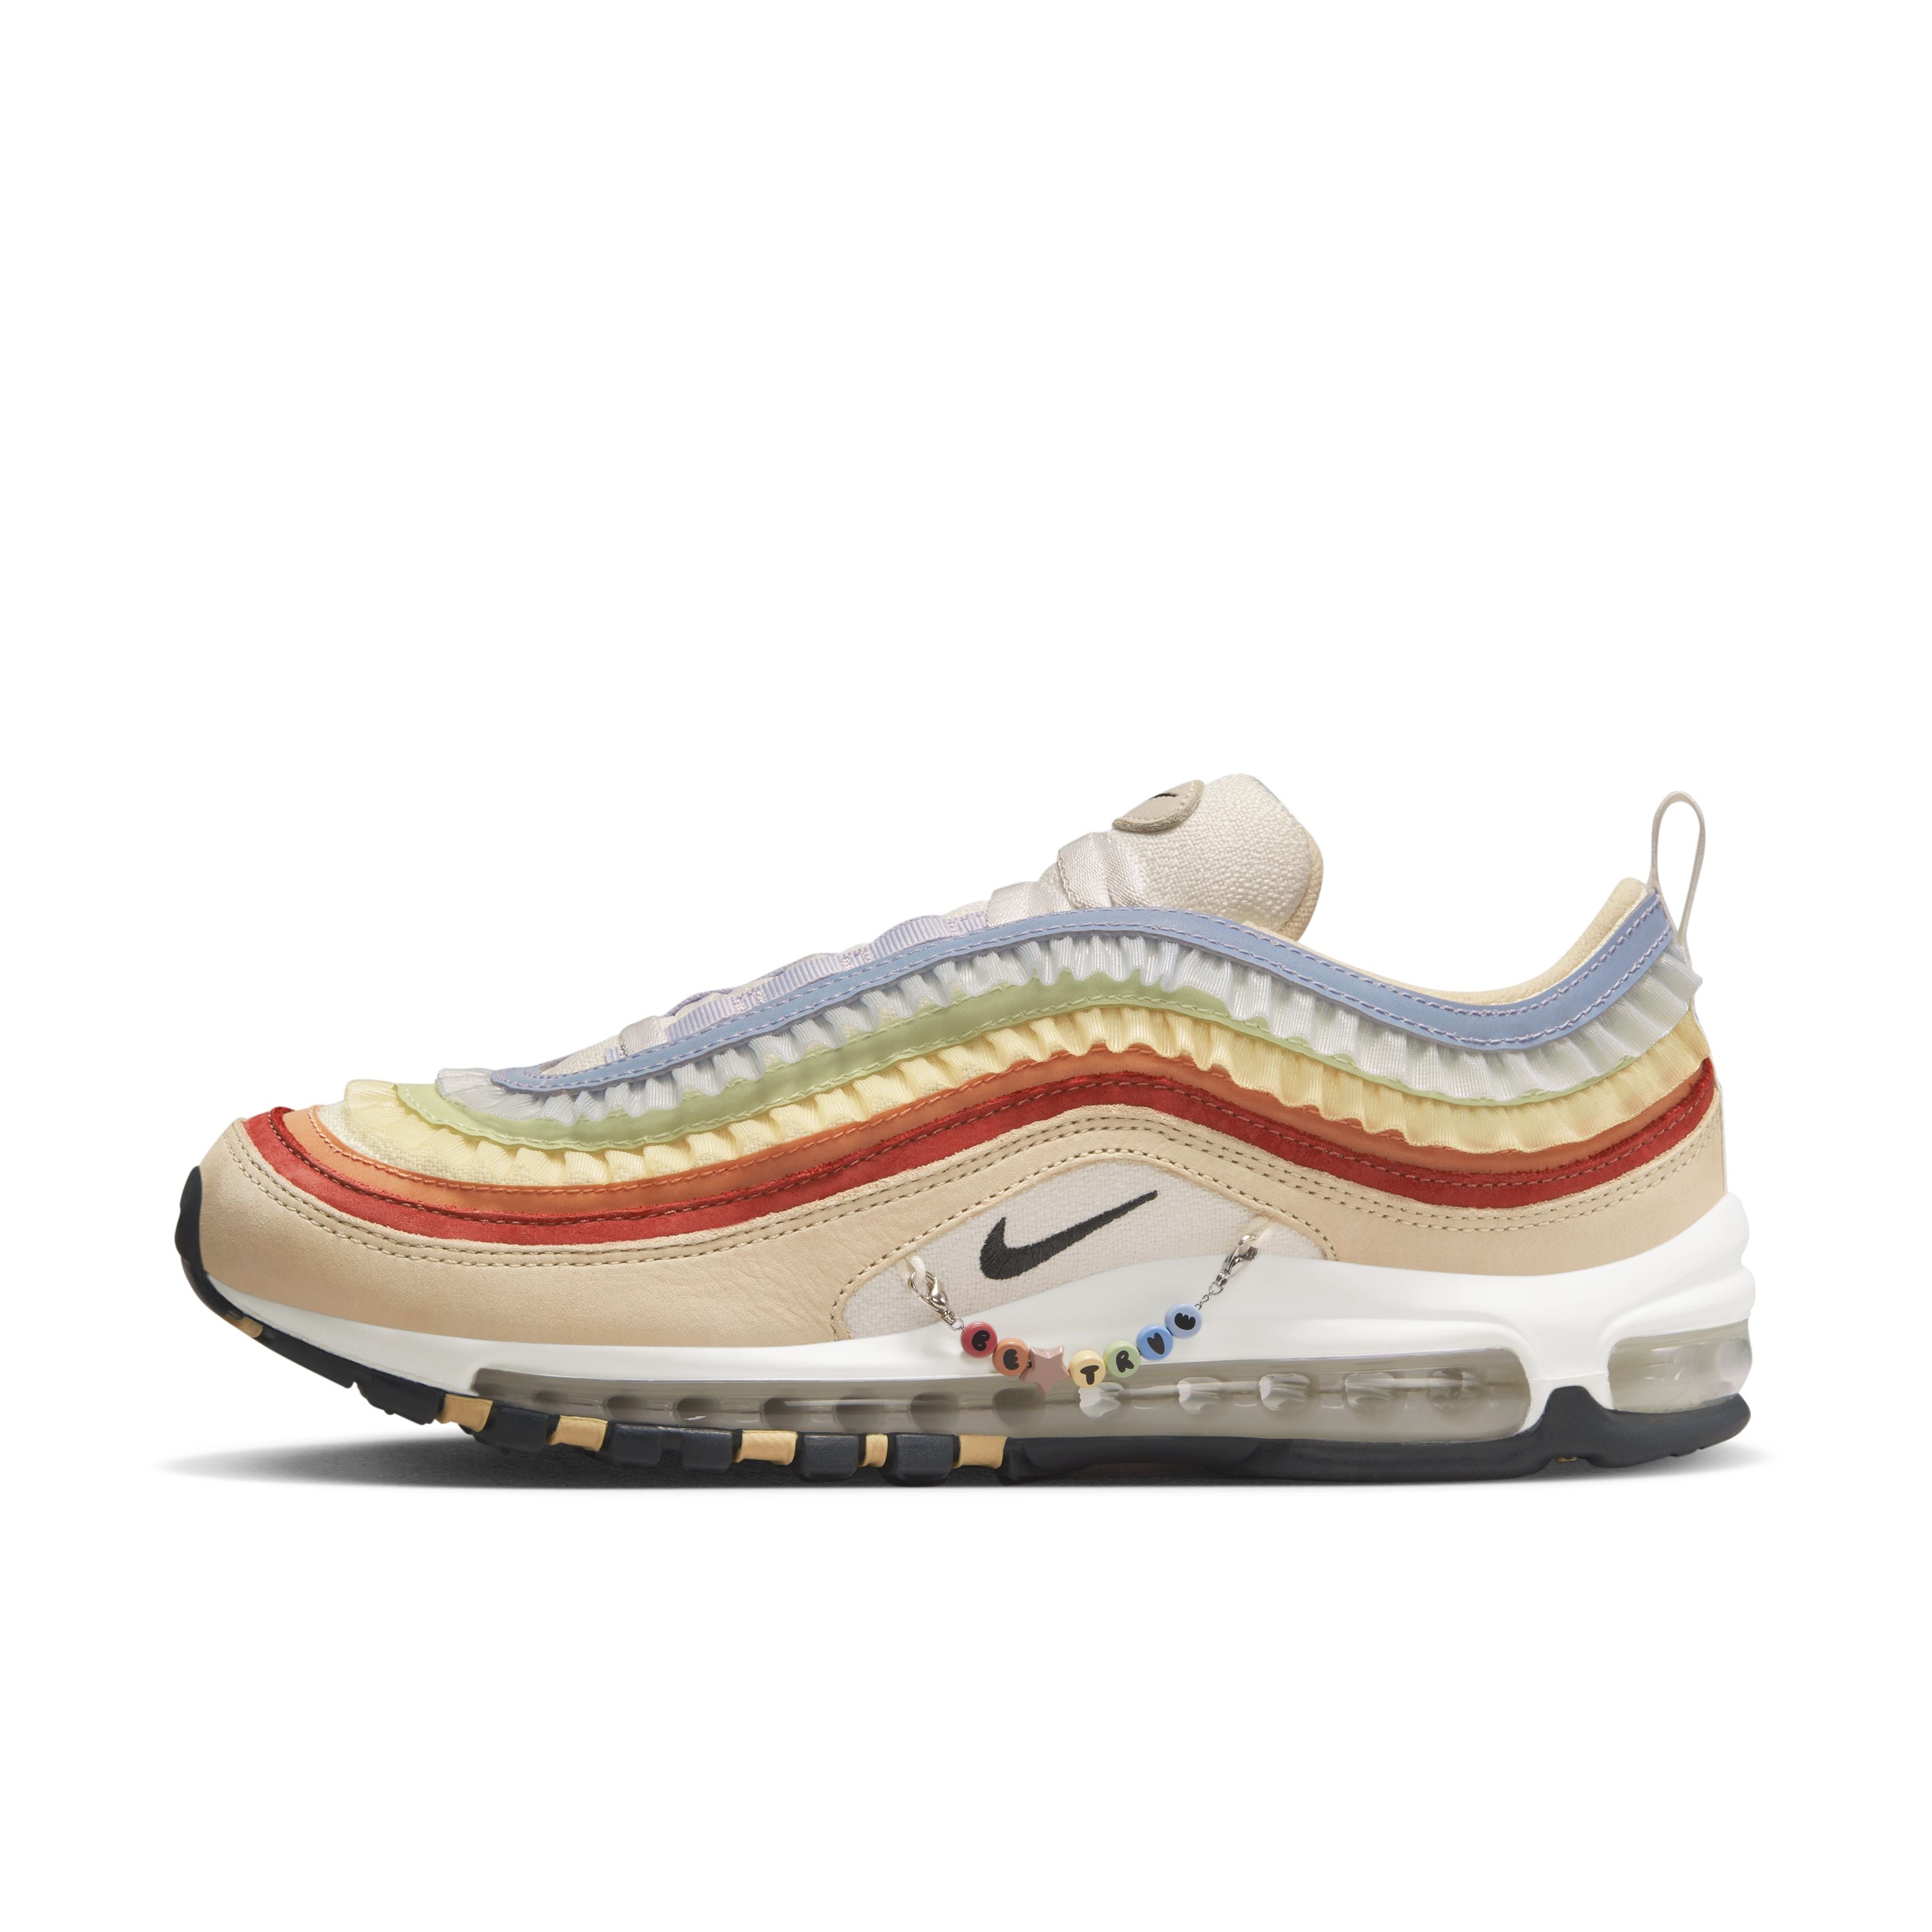 Air Max 97 - &#39;Be True&#39; - Pink Oxford/Anthracite/Adobe